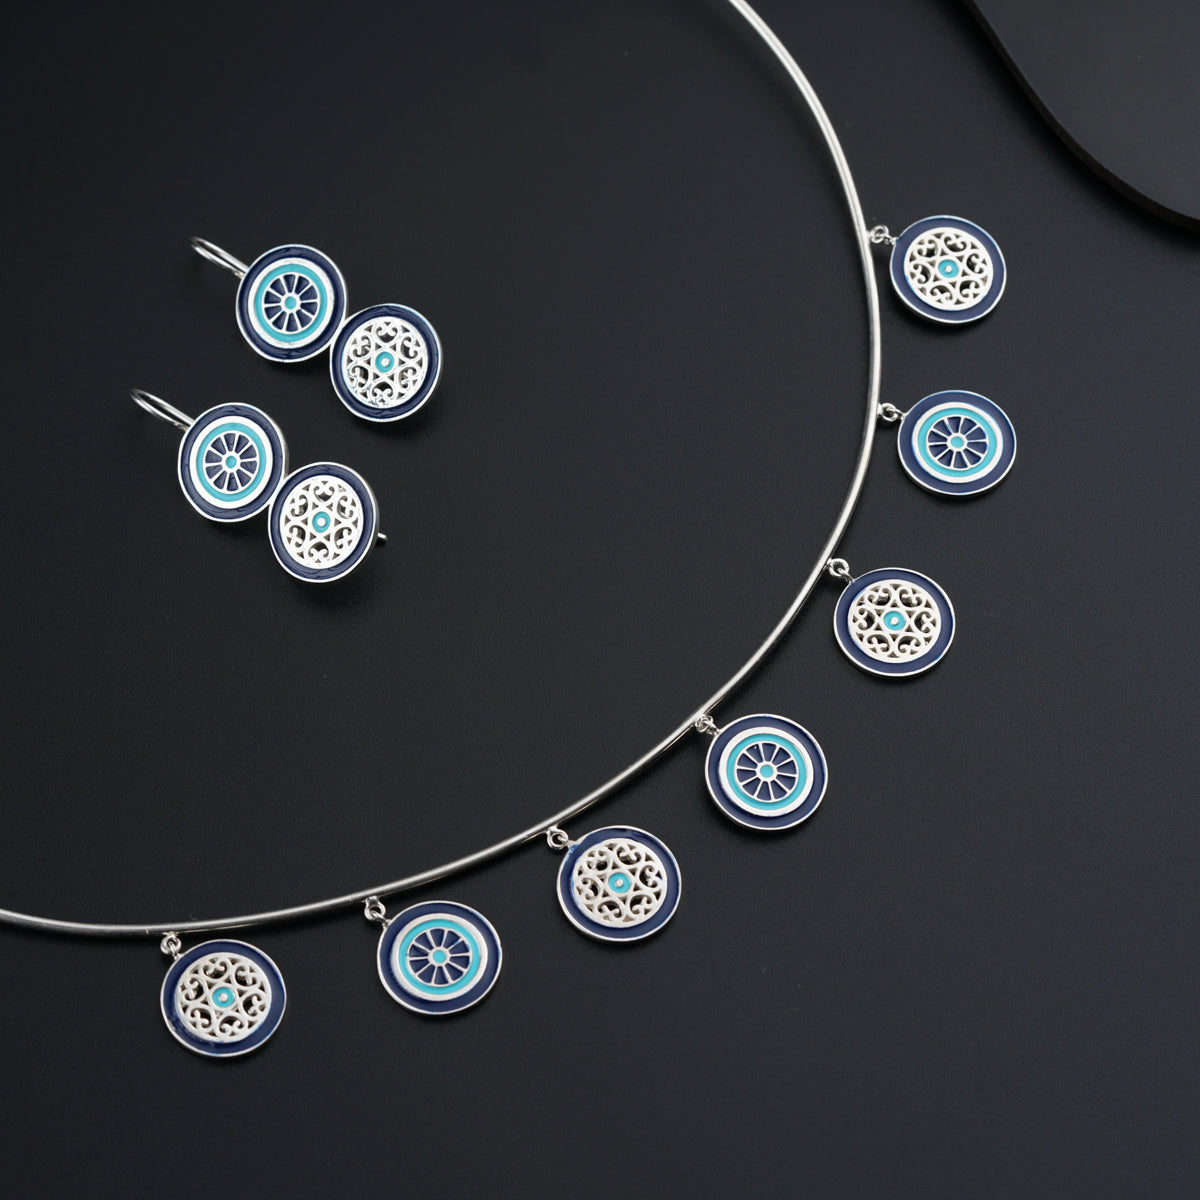 a blue and white necklace and earrings on a black surface